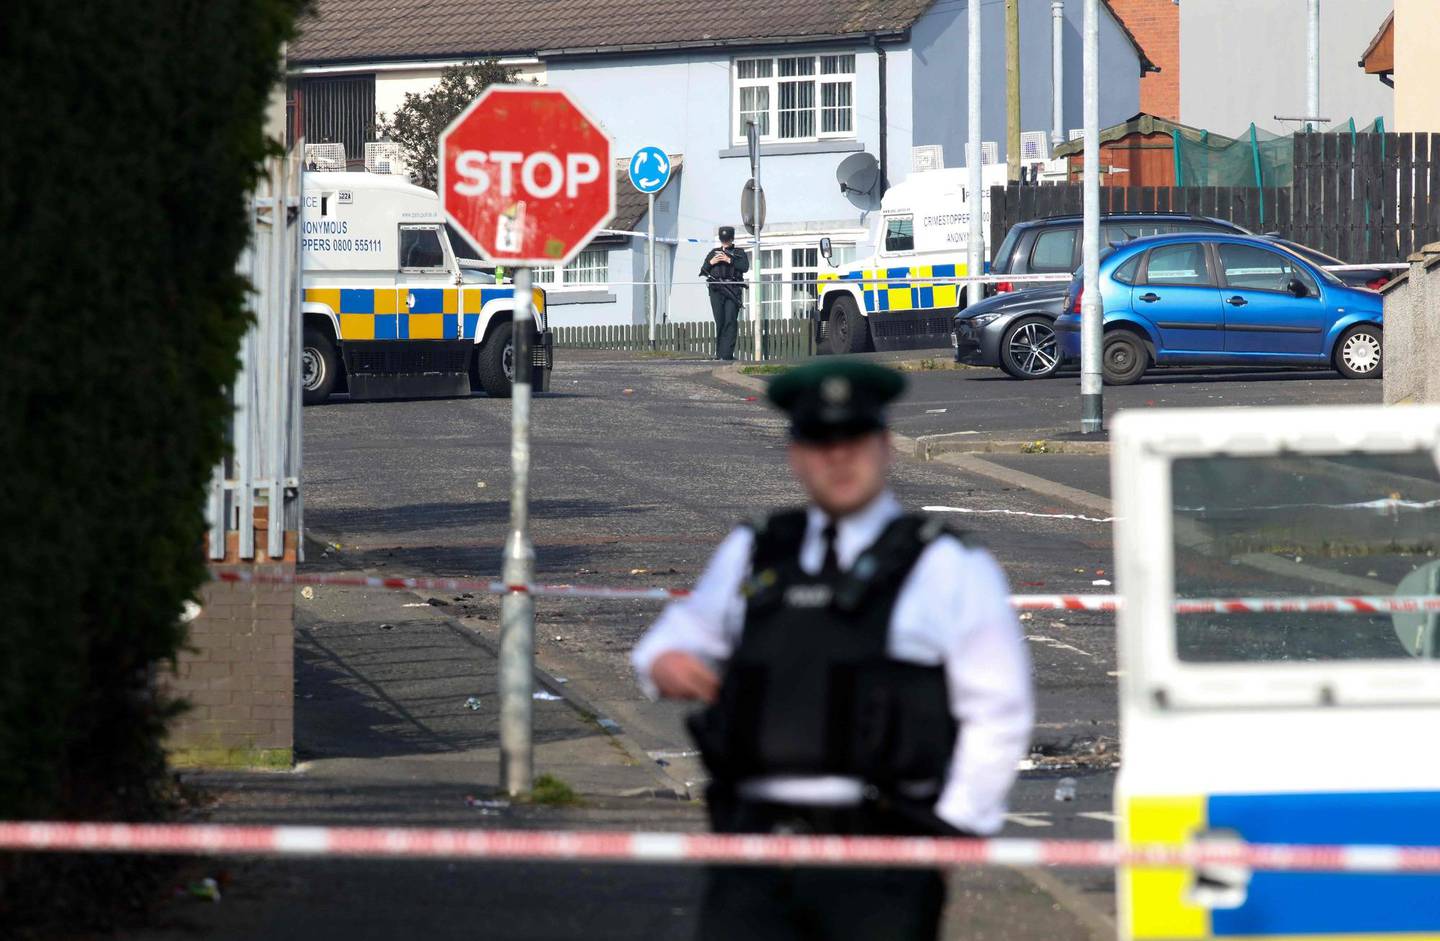 Police secure the area where a journalist was fatally shot amid rioting overnight in the Creggan area of Derry (Londonderry) in Northern Ireland on April 19, 2019. - Journalist Lyra McKee was shot dead overnight during riots in the Creggan area of Derry, Northern Ireland, in what police on April 19 were treating as a terrorist incident following the latest upsurge in violence to shake the troubled region. (Photo by Paul Faith / AFP)